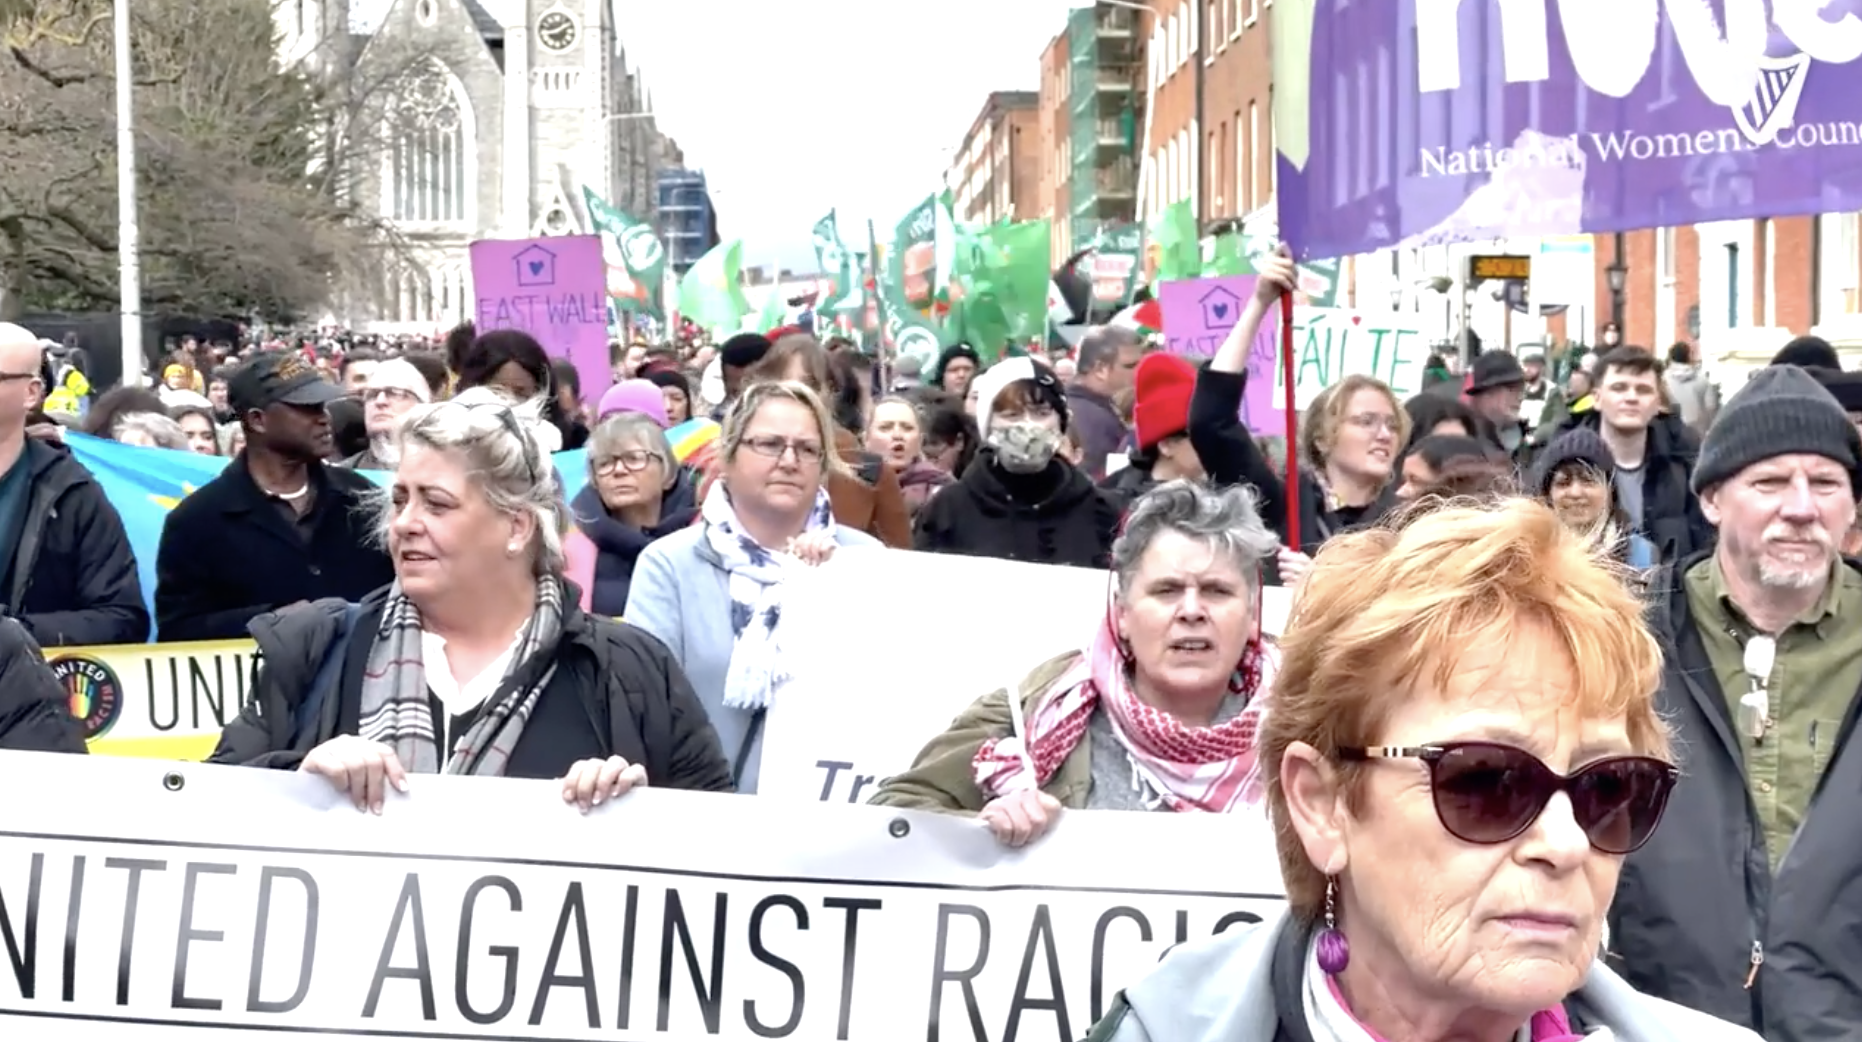 SUPPORT: Tens of thousands turned out in Dublin to oppose the \'Ireland is full\' narrative